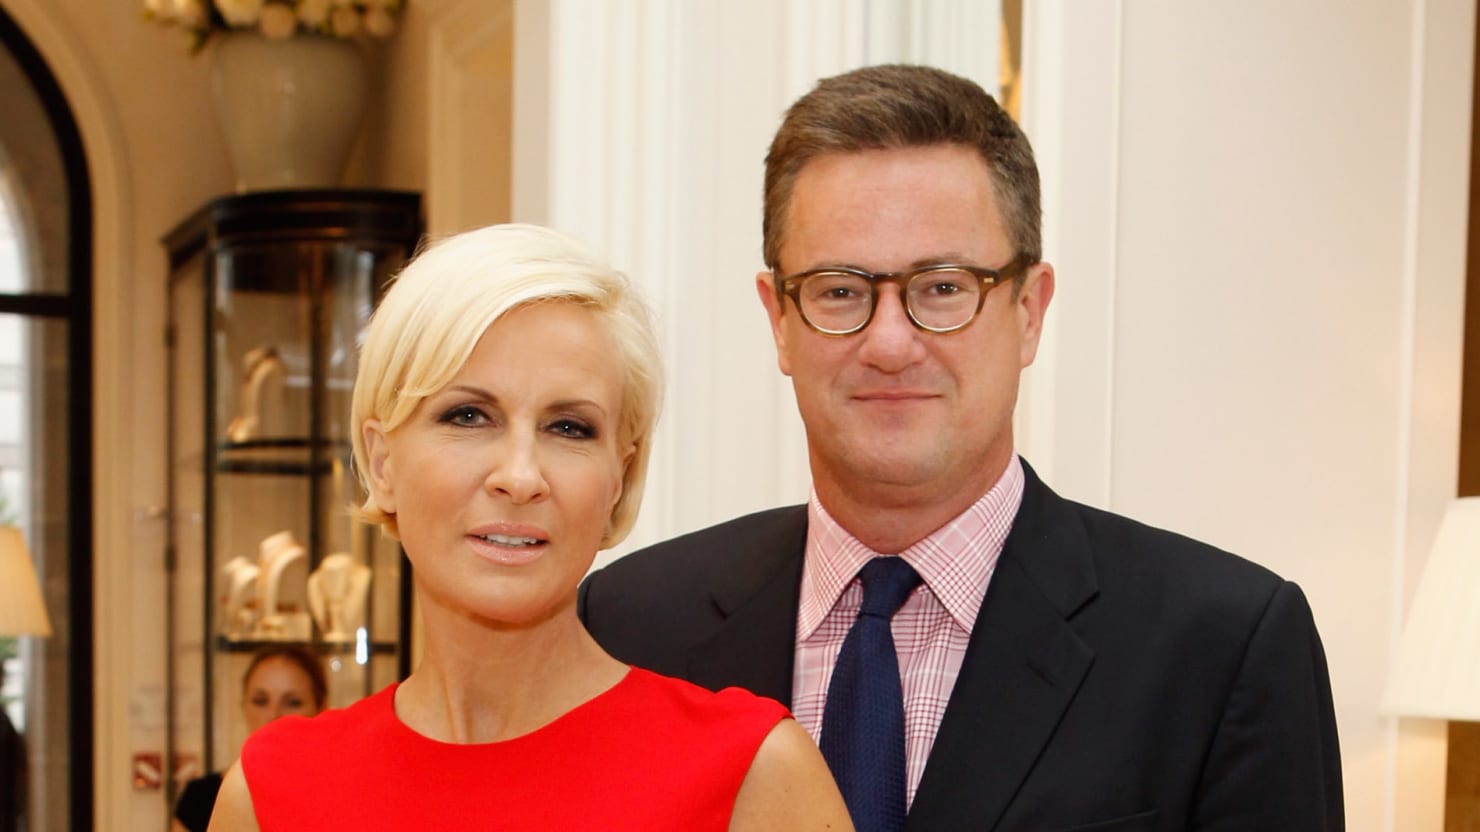 Joe Scarborough And Mika Brzezinski Are Engaged The Daily Beast